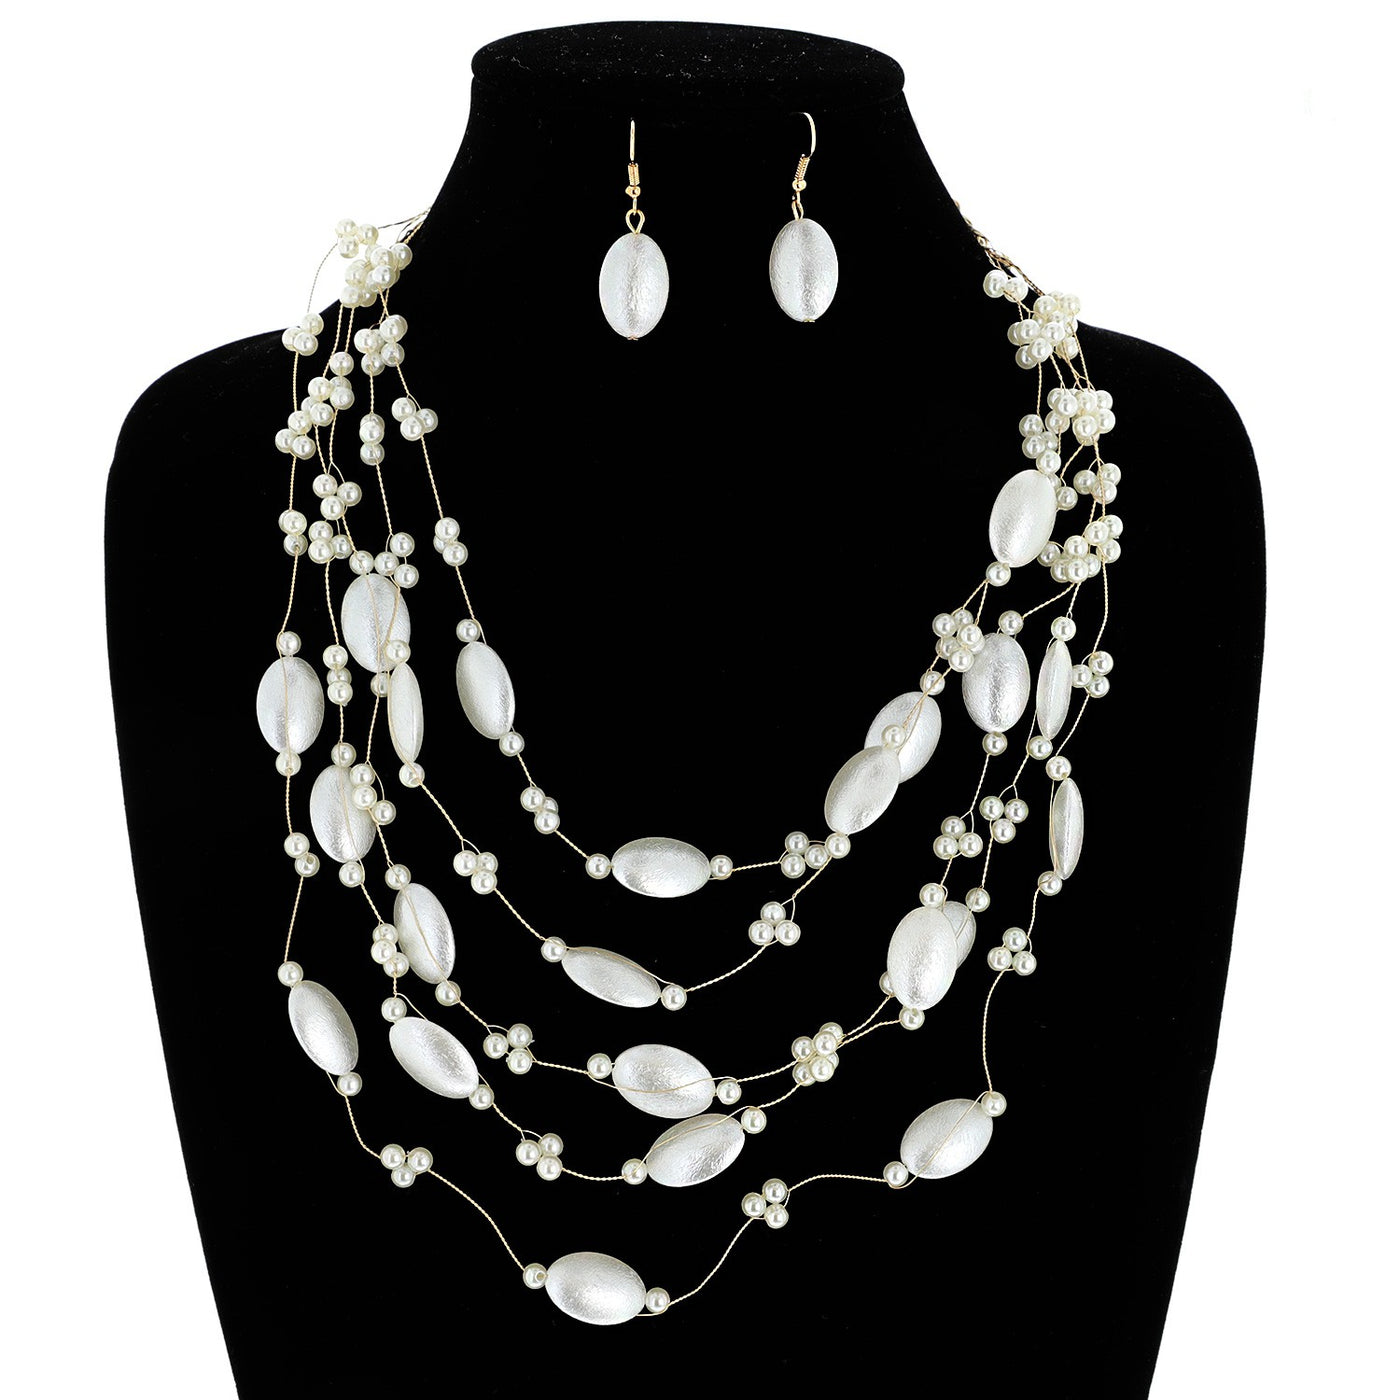 PEARL ILLUSION NECKLACE & EARRINGS SET